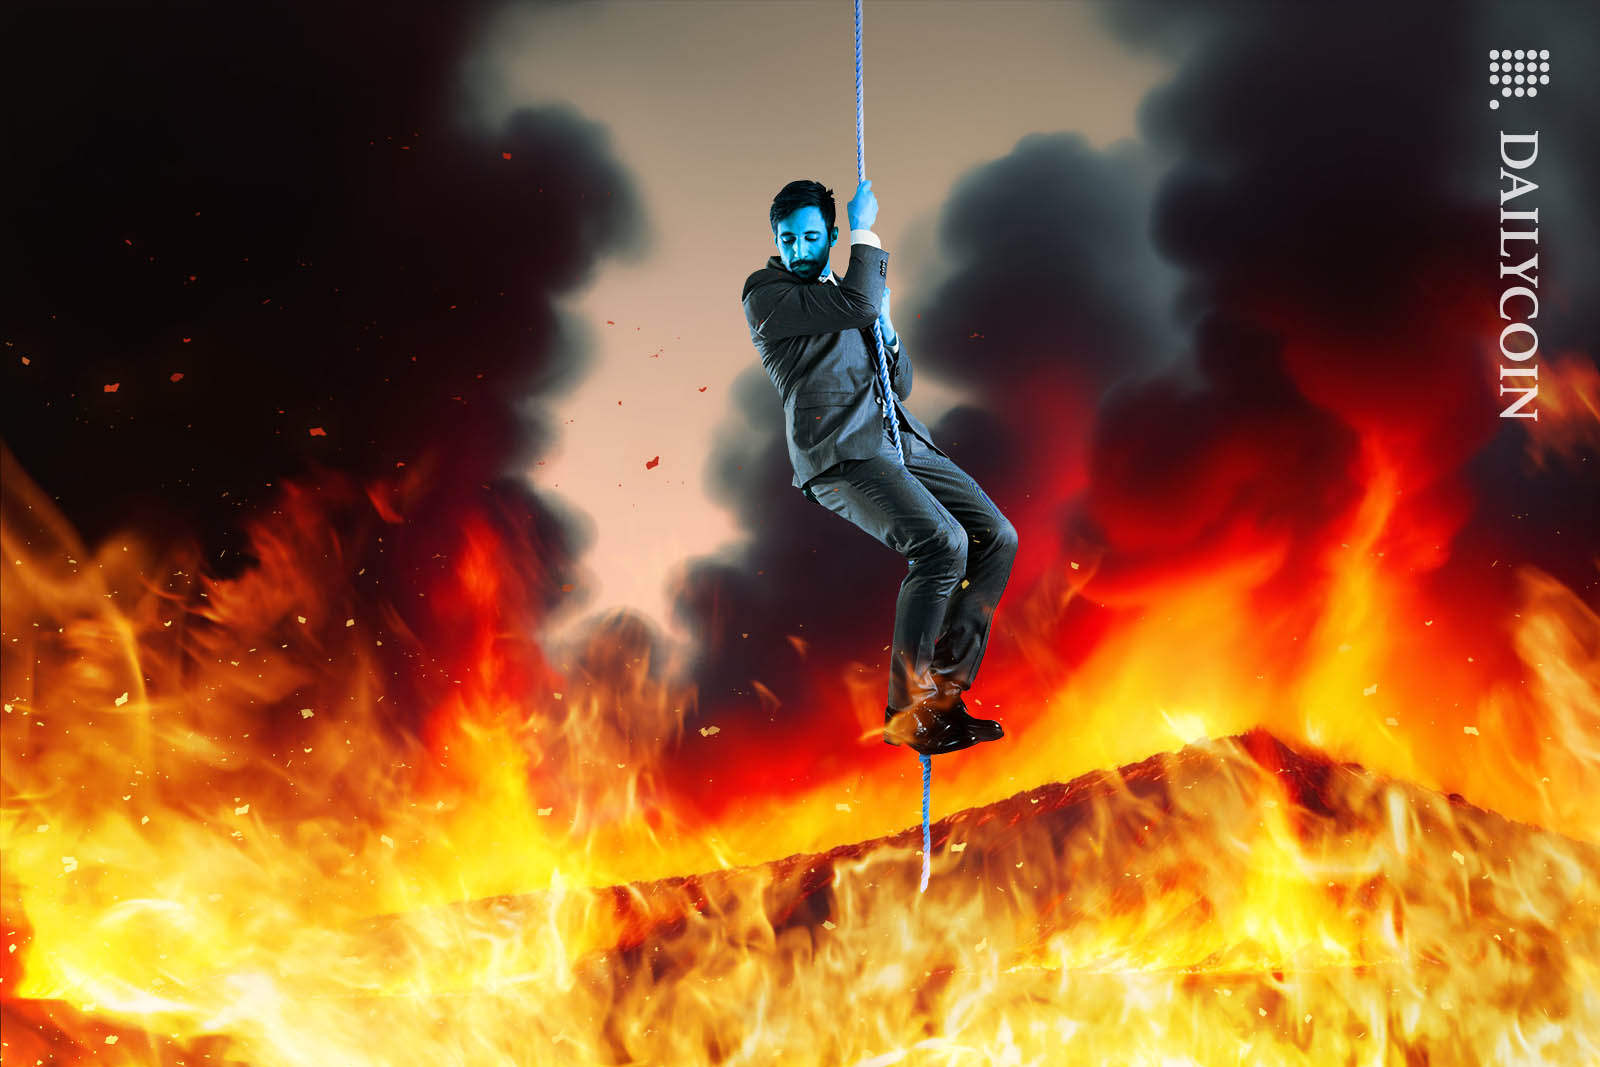 Blue man hanging on a rope above fiery inferno.